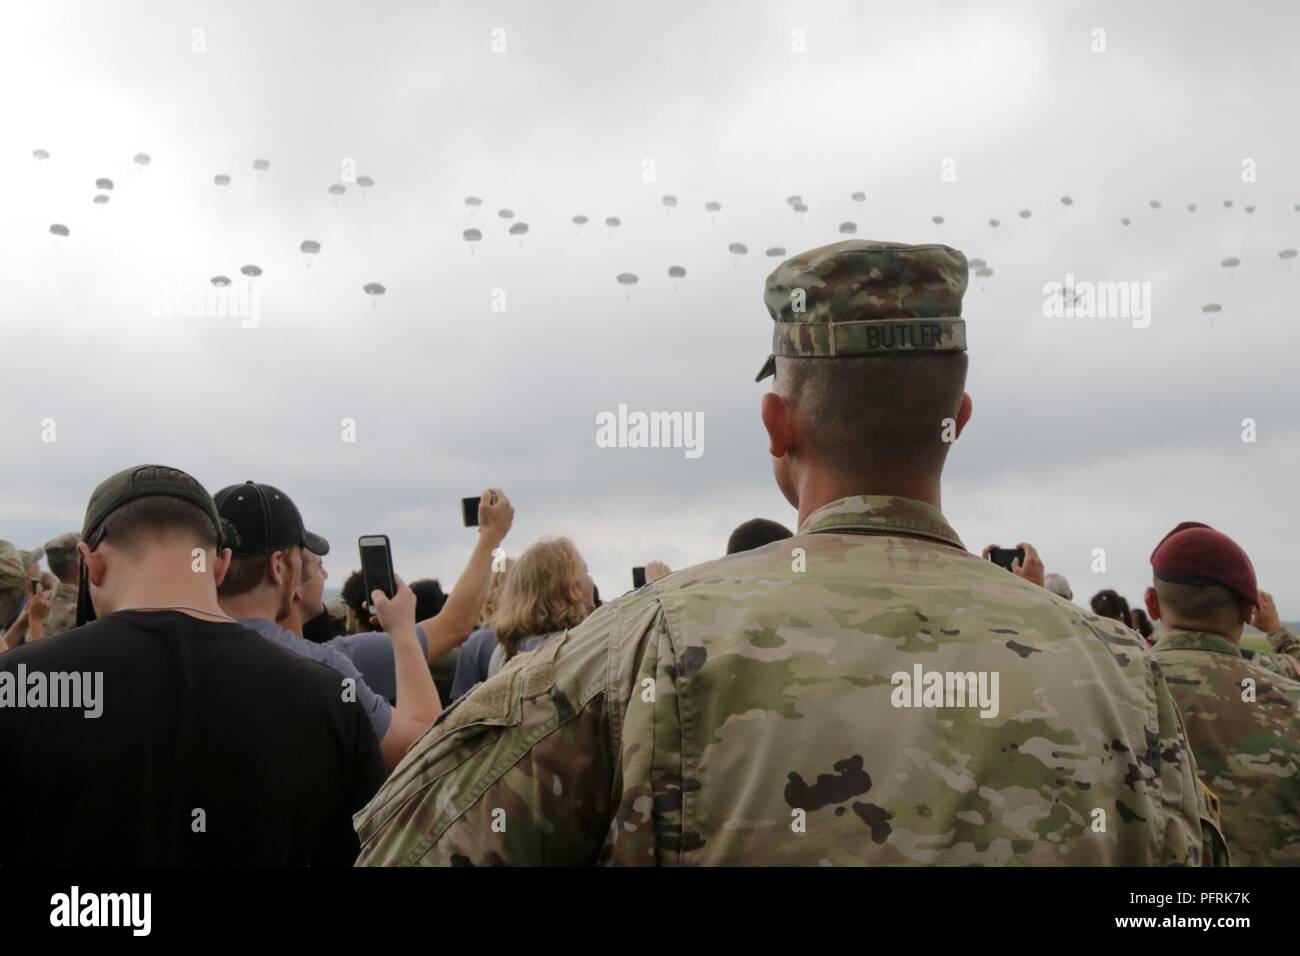 Future Soldiers and U.S. Army recruiter Staff Sgt. Adam Butler, assigned to the Raleigh Recruiting Battalion, watch paratroopers descend from sky during the 82nd Airborne Division’s Airborne Review at Sicily Drop Zone on Fort Bragg, North Carolina, May 24, 2018. Approximately 350 future Soldiers and recruiters from Raleigh Recruiting Battalion attended the Airborne Review and toured Fort Bragg during All American Week. Stock Photo